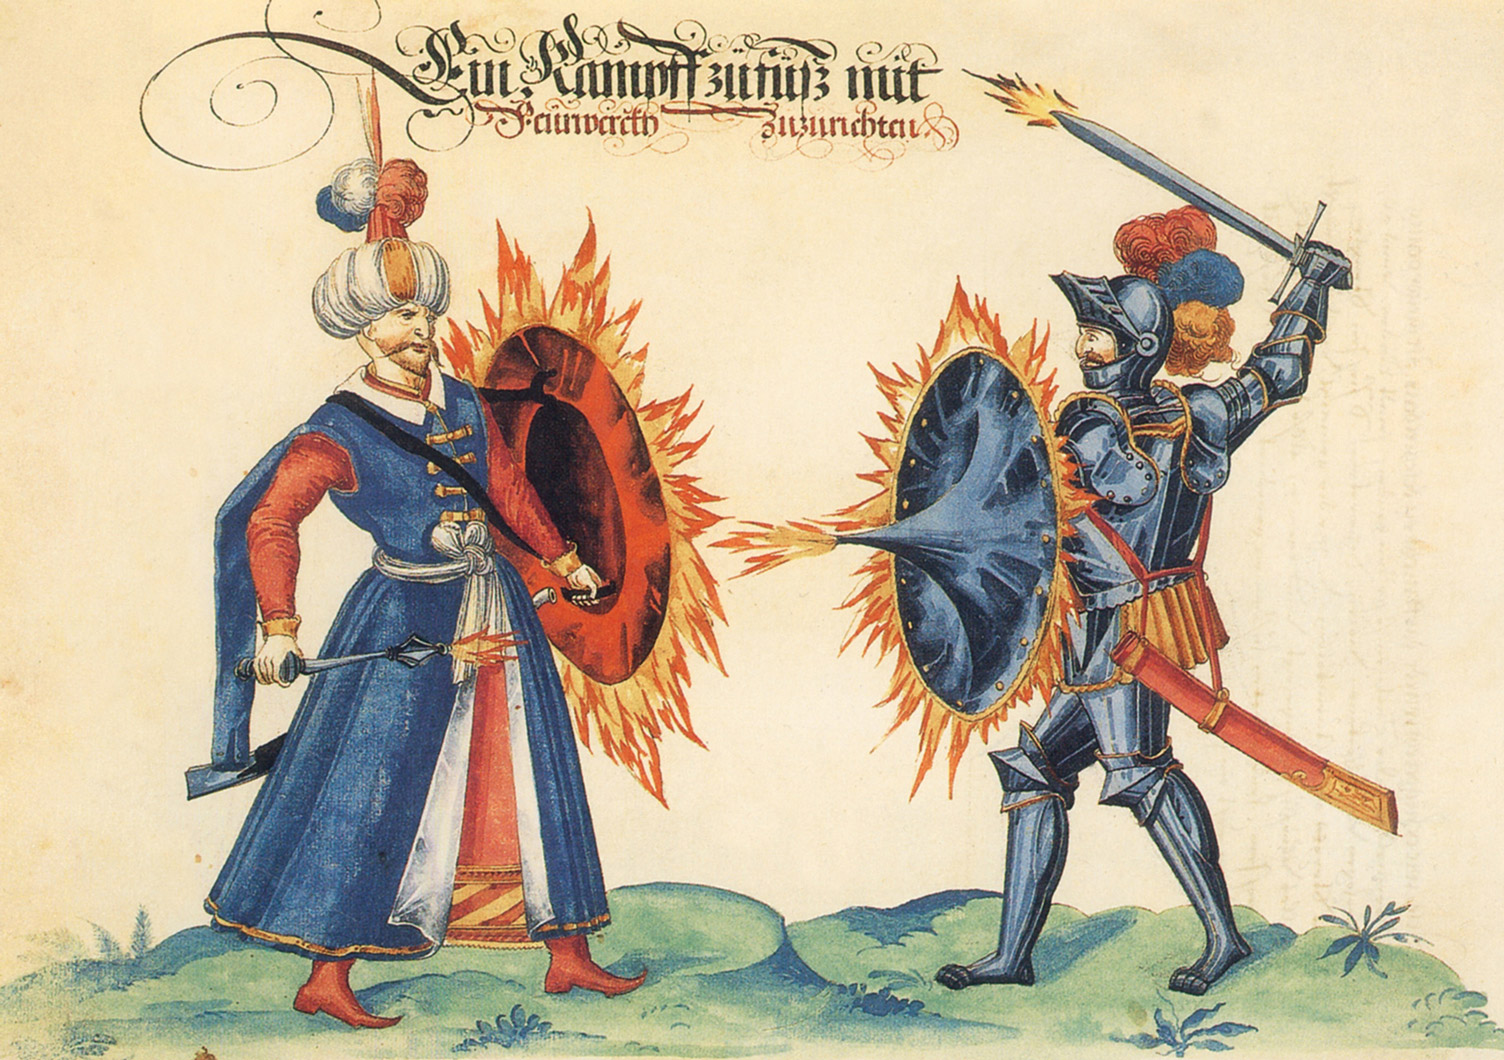 A 1594 painting from a manuscript by Friedrich Mayer. The painting depicts a Christian knight and a Turk in battle.